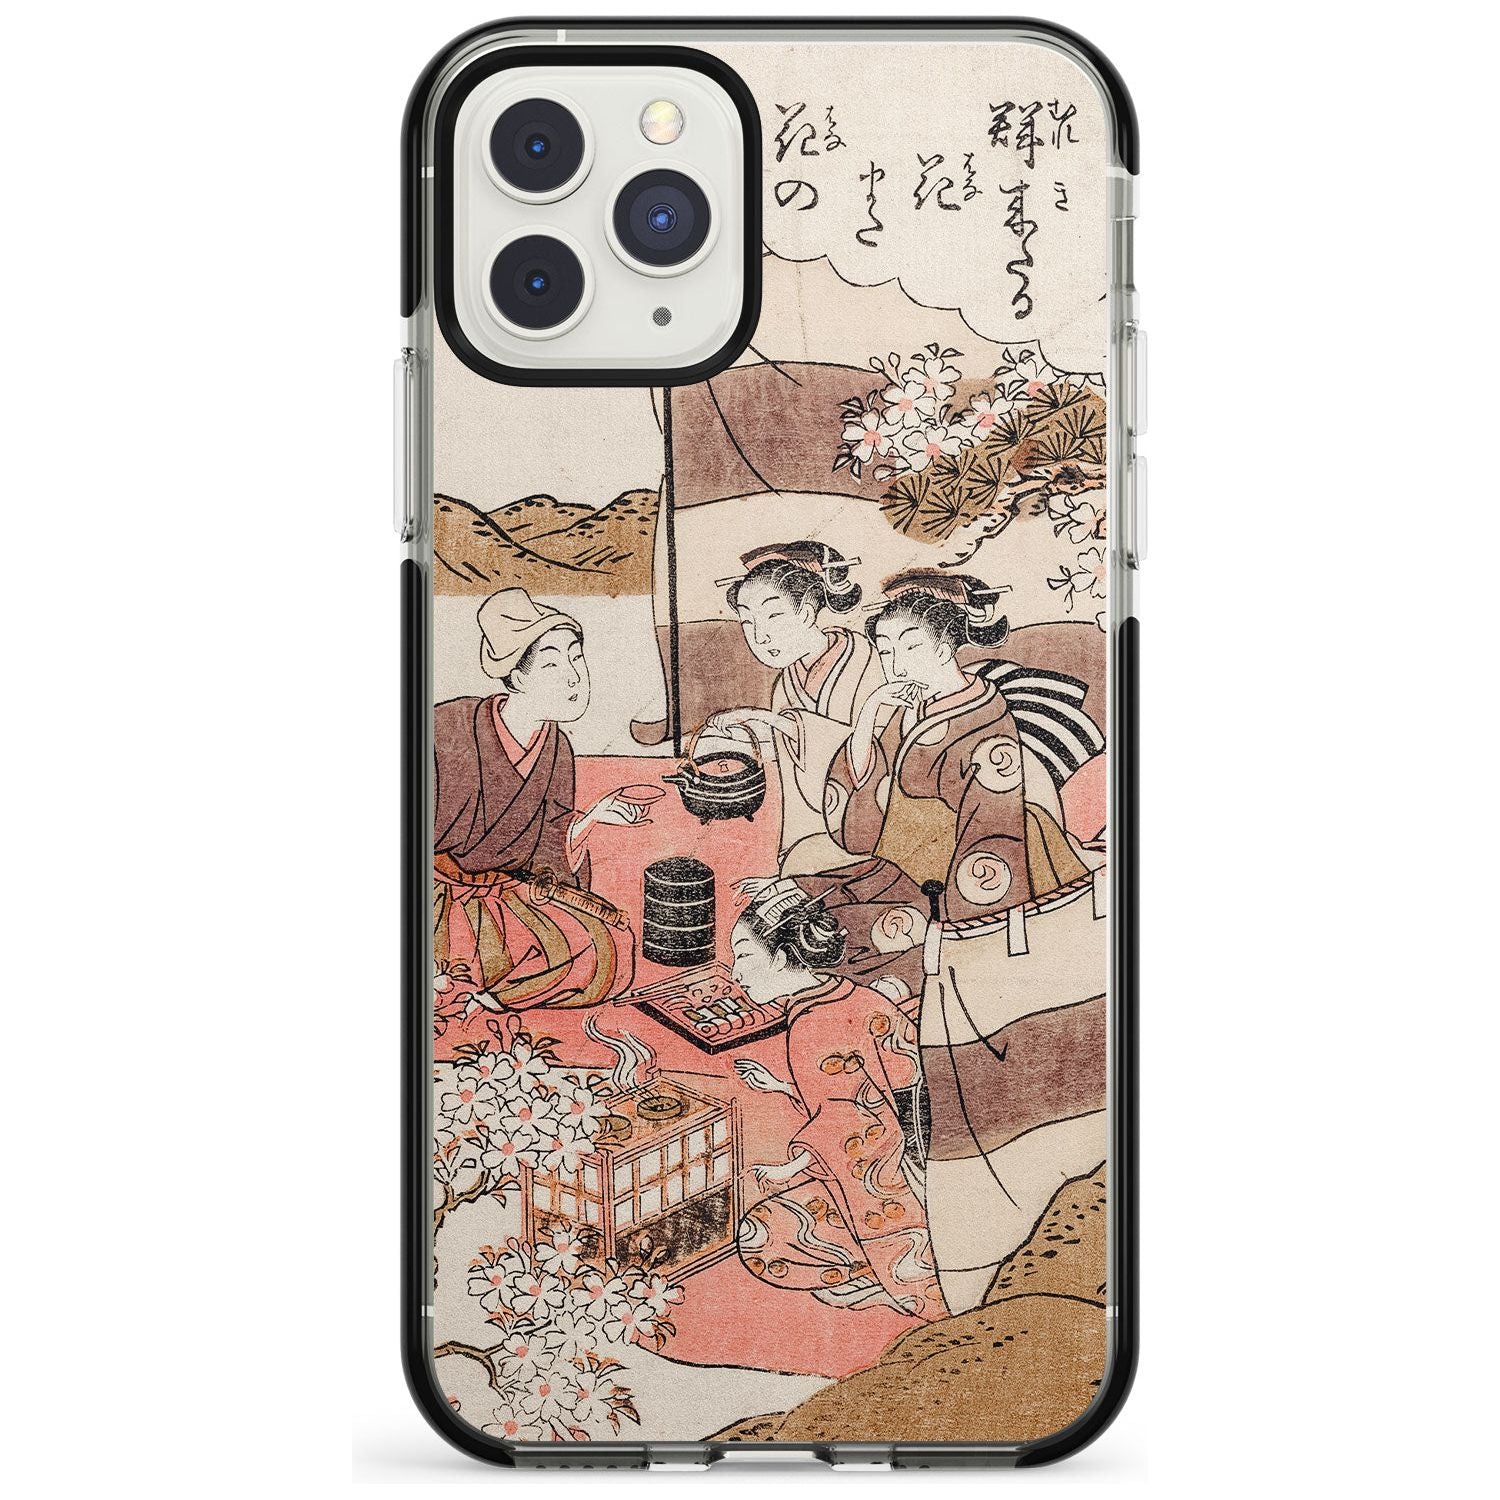 Japanese Afternoon Tea Black Impact Phone Case for iPhone 11 Pro Max